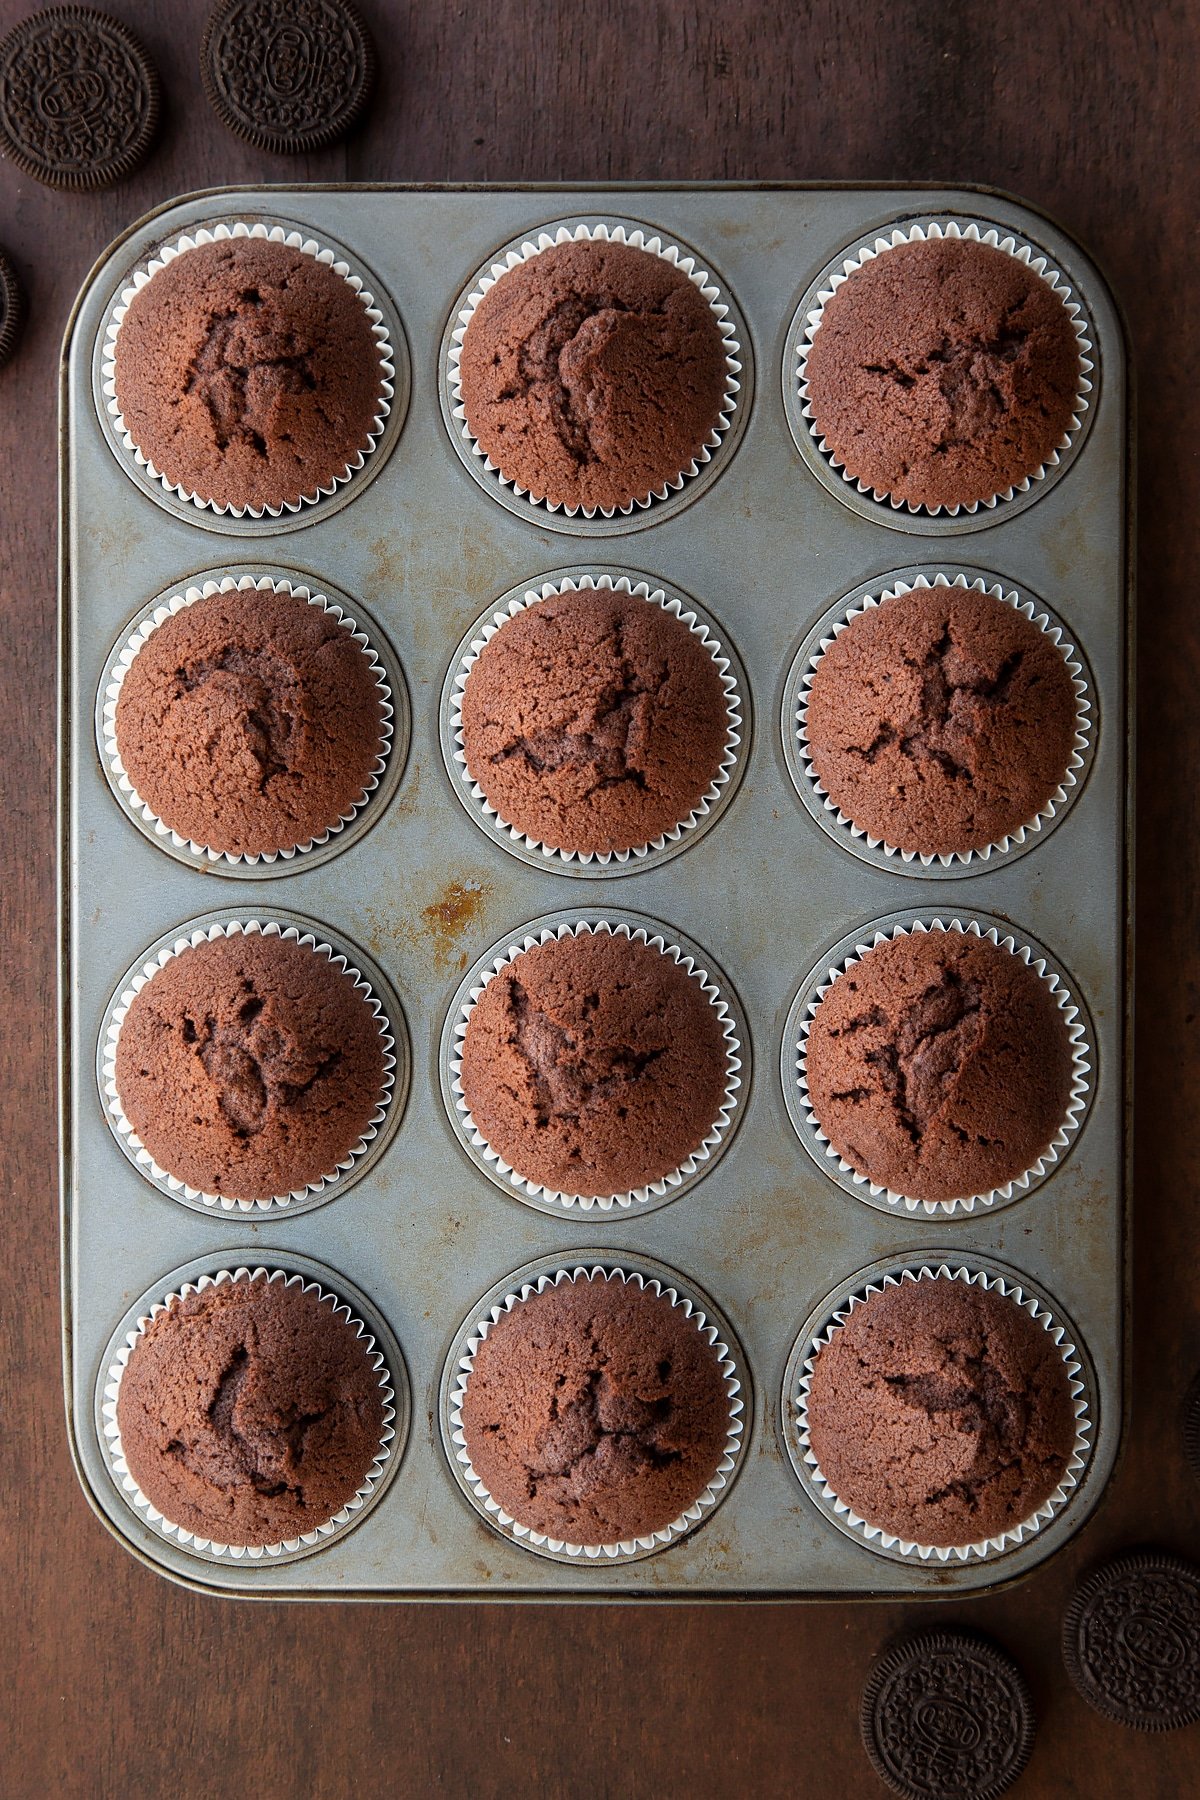 Overhead shot of baked chocolate cupcakes in a cupcake tray